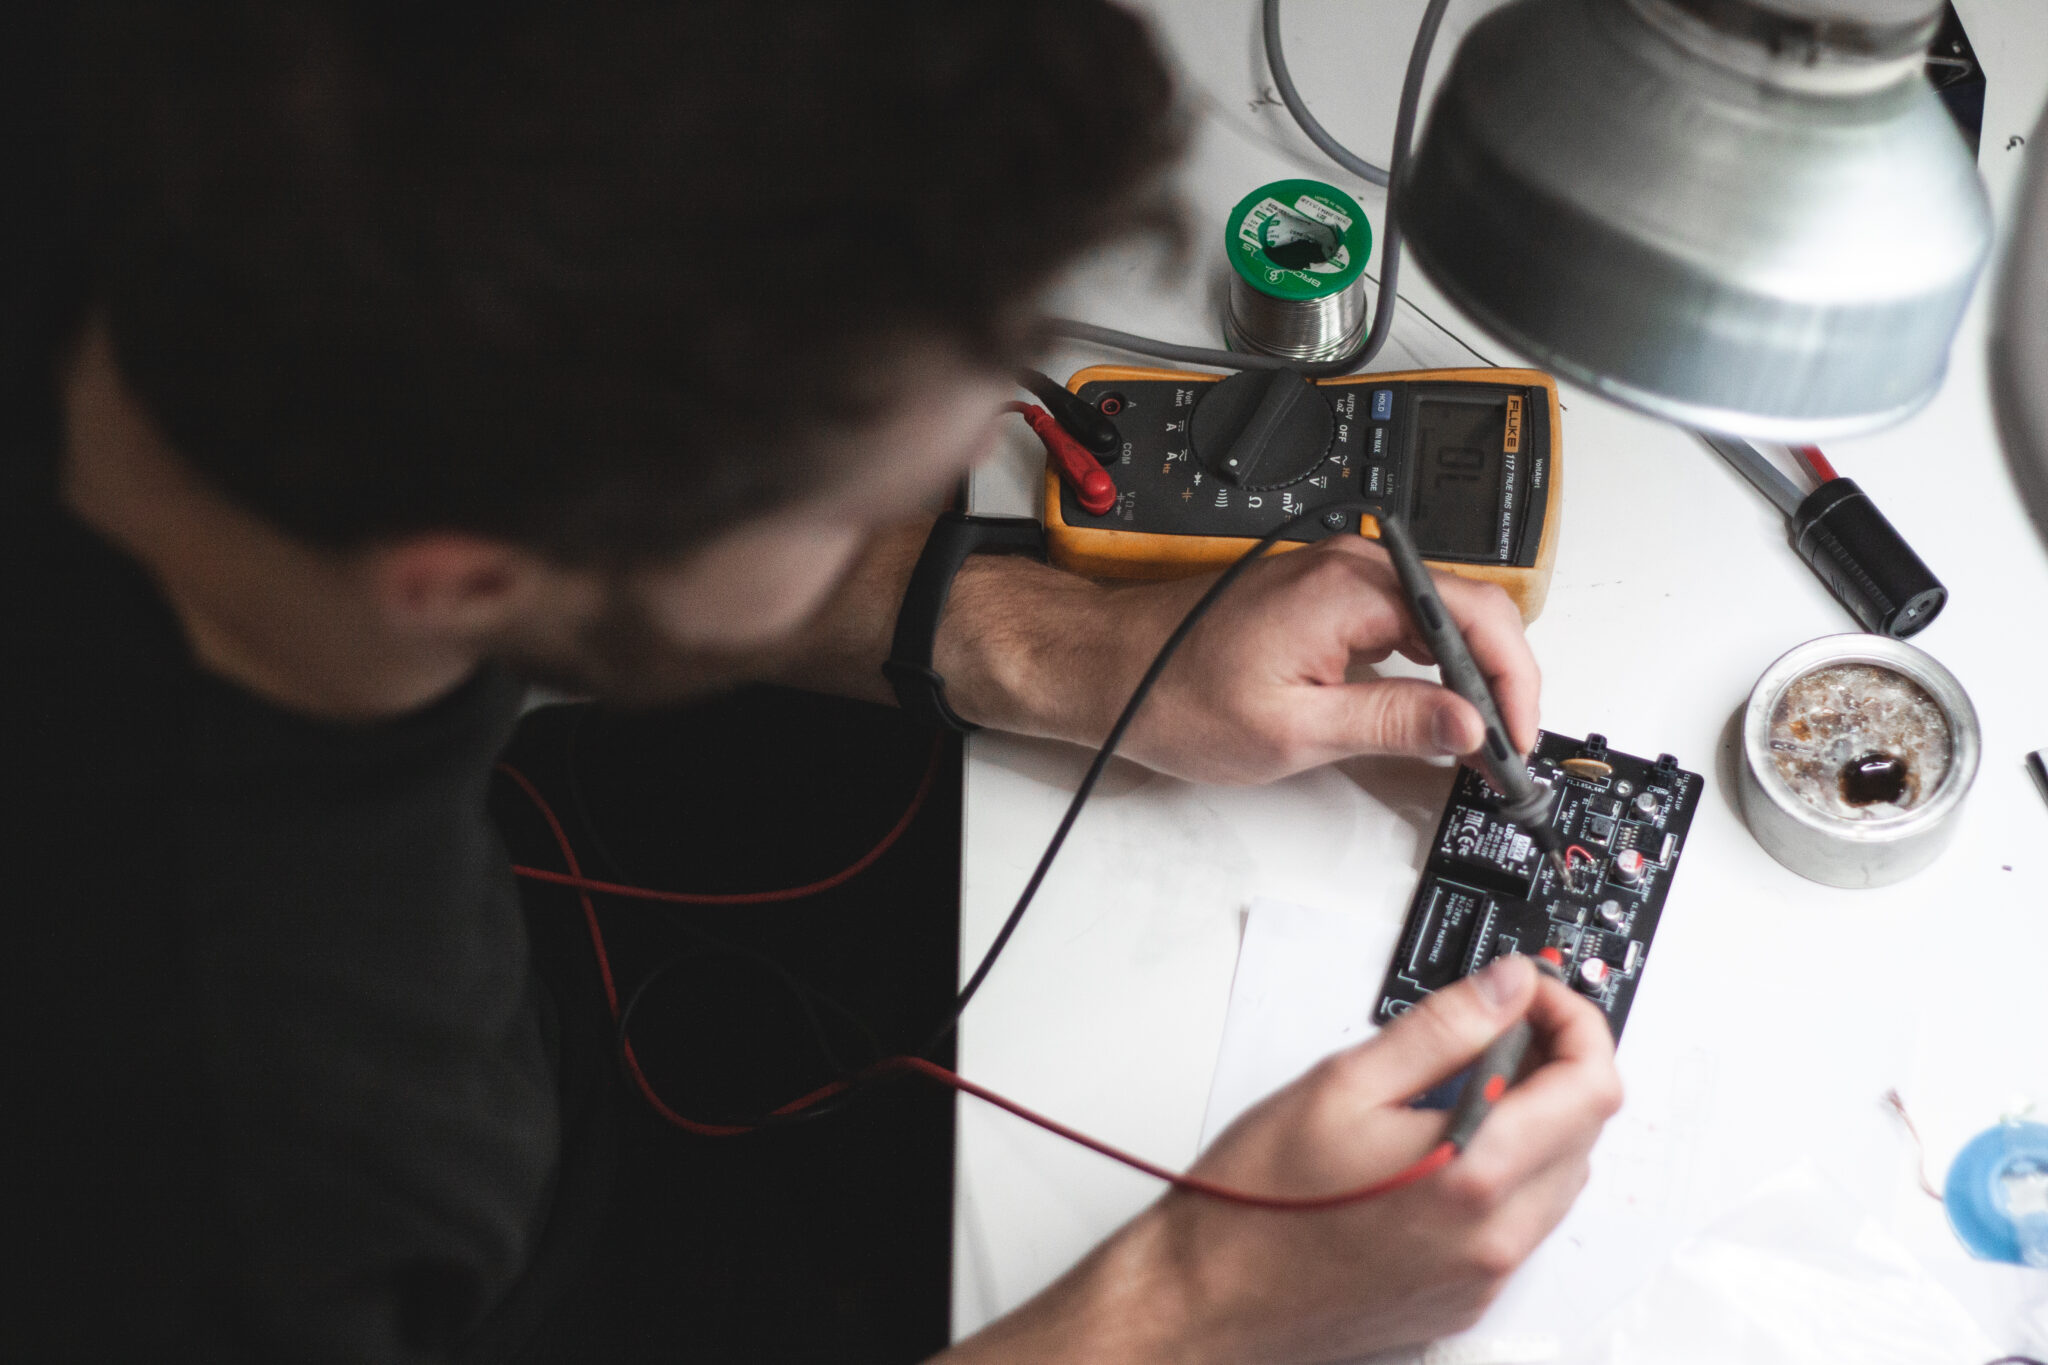 As an electronics designer with us, you work with electronics design at PCB level with memories, microprocessors and peripheral circuits such as sensors, etc.